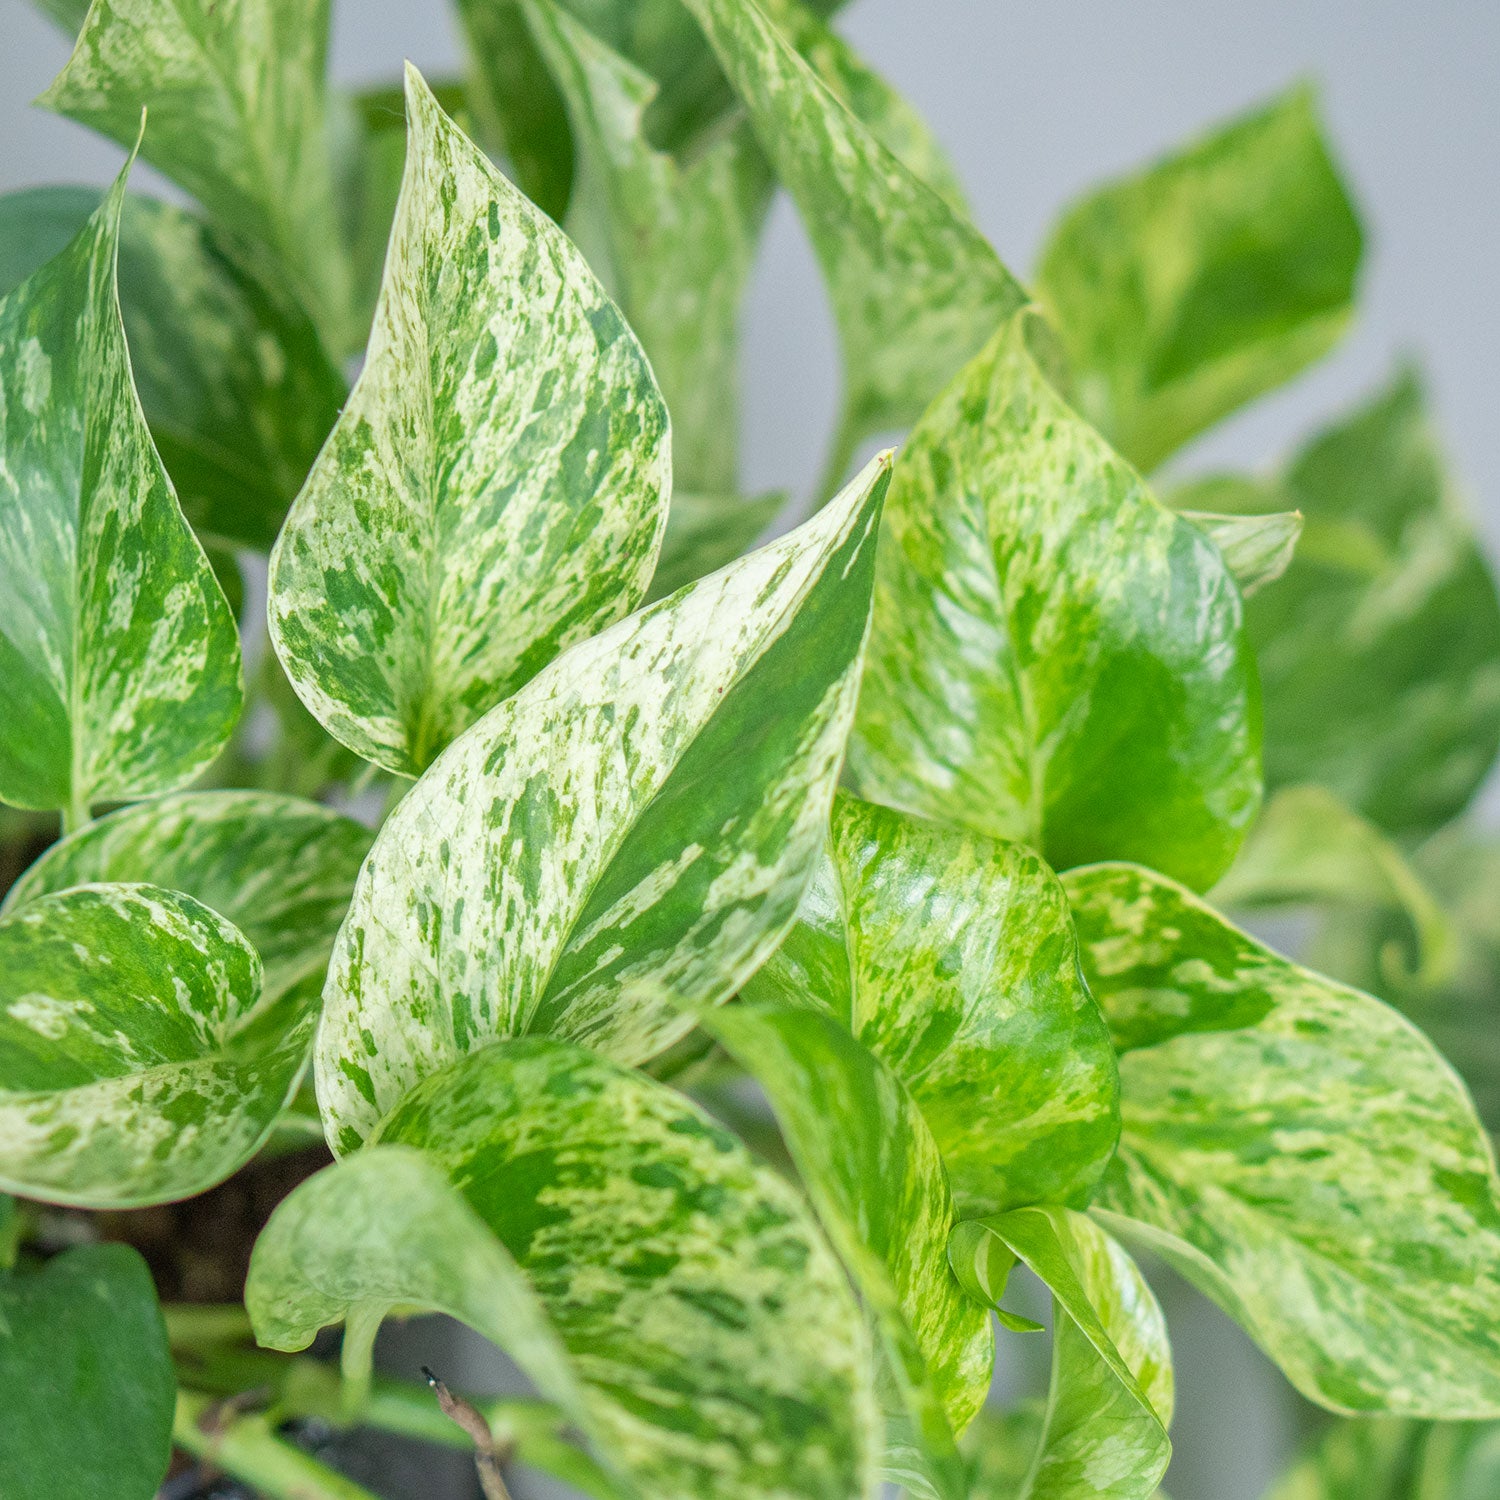 Leaves of Potted Pothos Marble Queen - Best Quality Easy-Care Trailing Houseplant Pothos Marble Queen 6” - Buy repotted easy-care indoor plant Pothos White Marble for delivery at Planteia